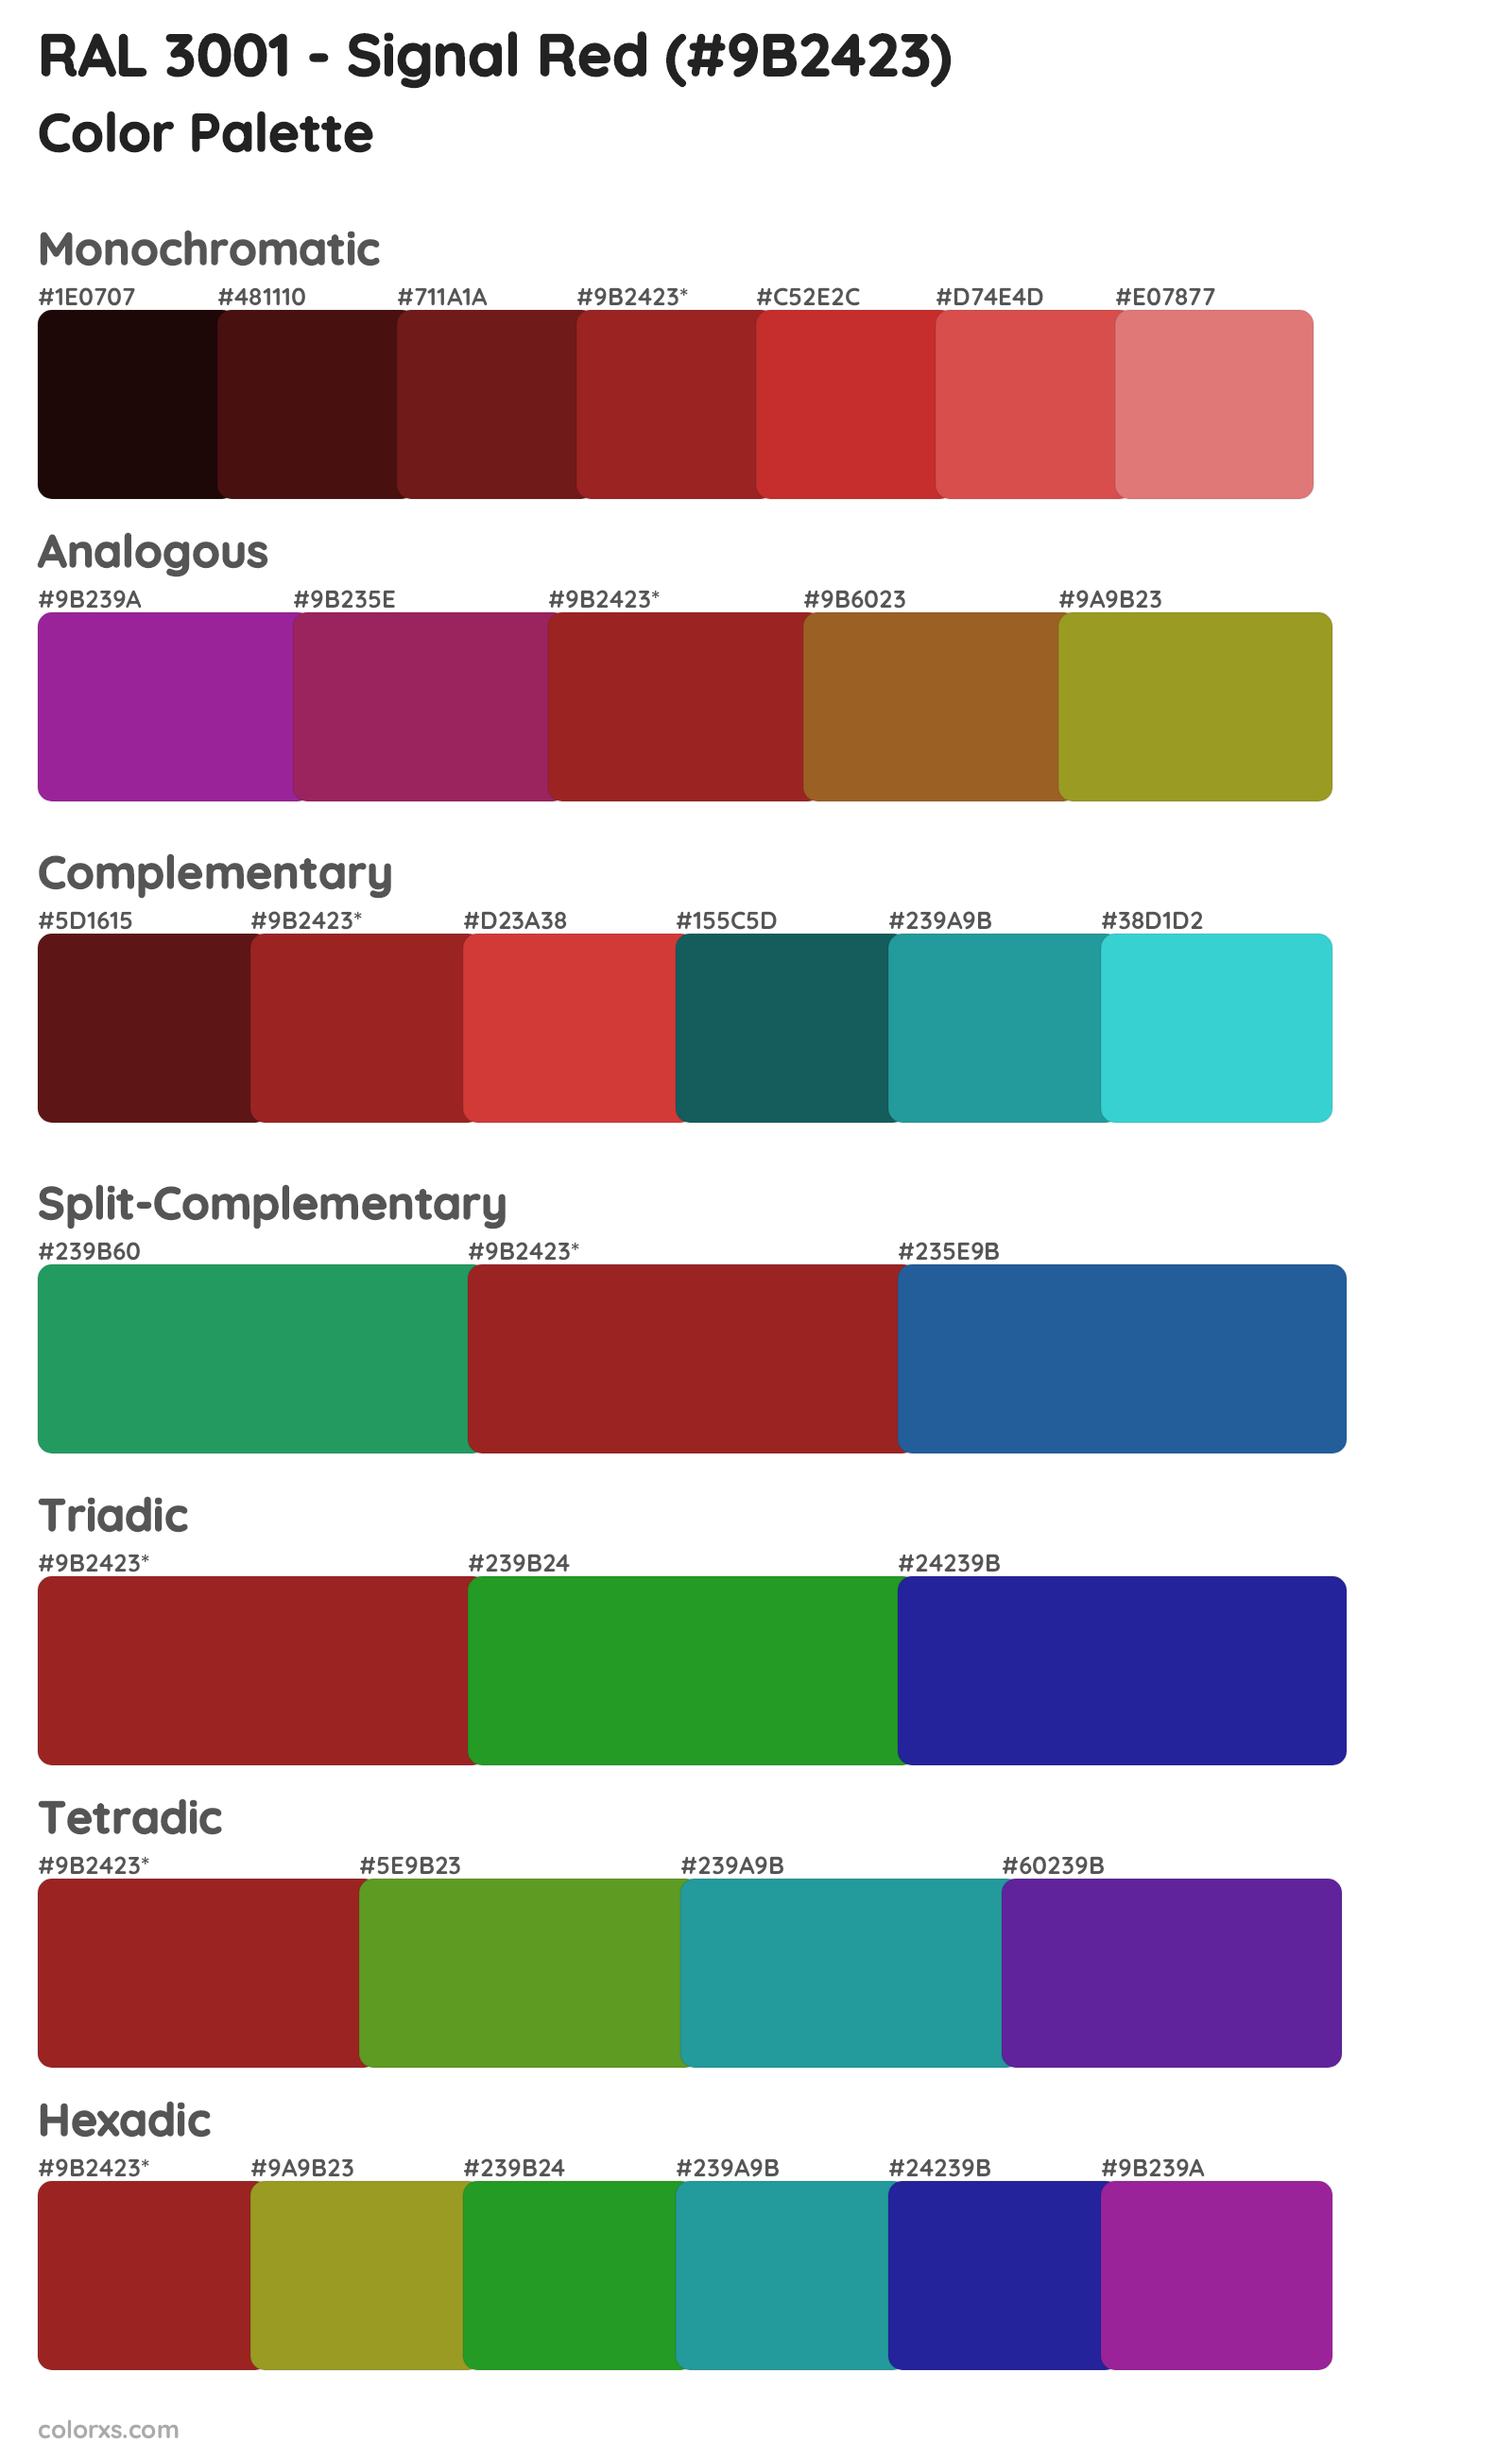 RAL 3001 - Signal Red Color Scheme Palettes